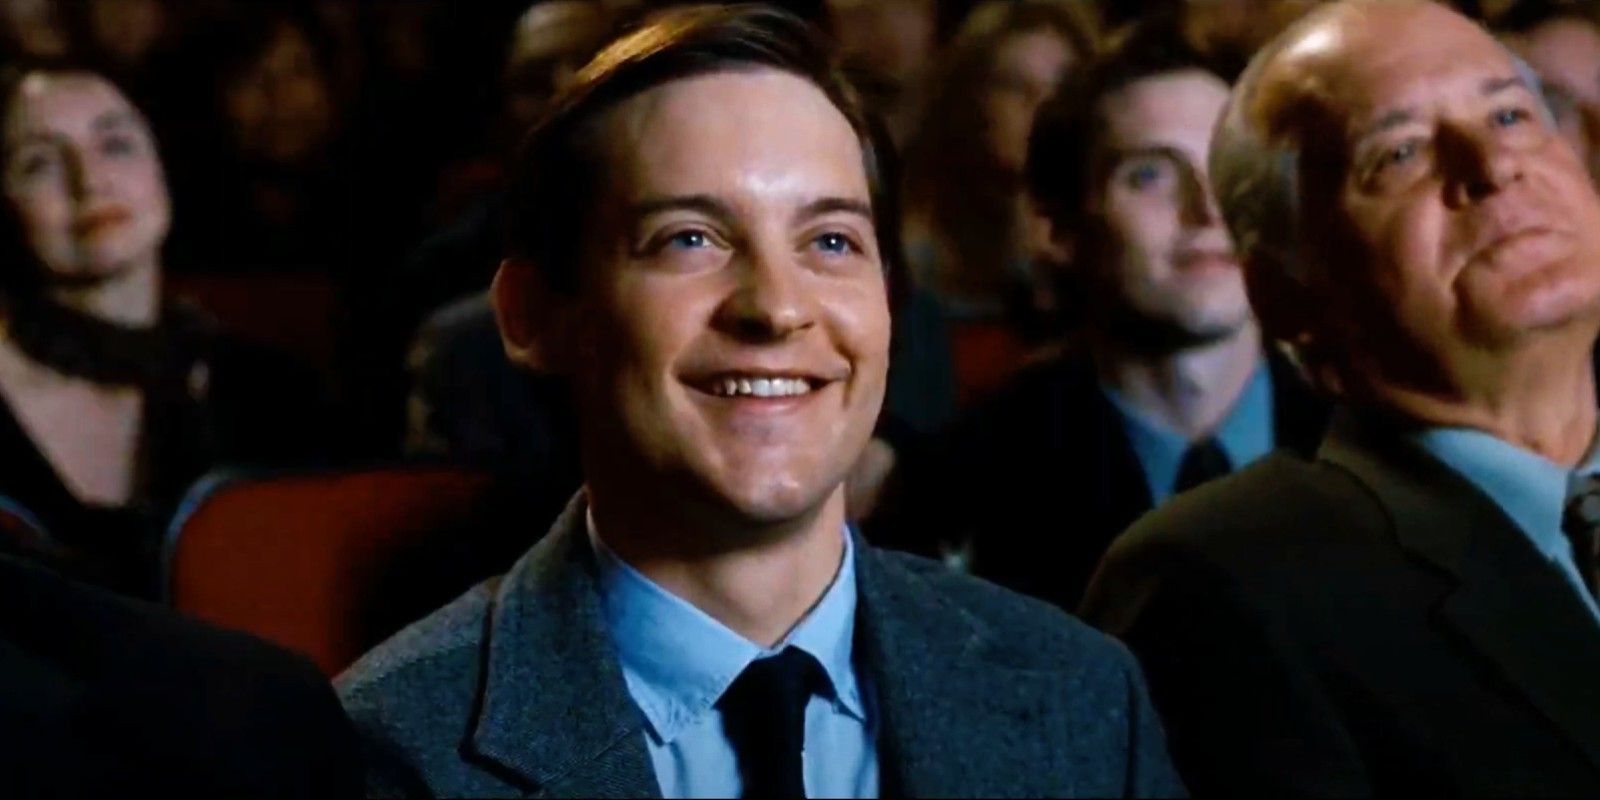 Tobey-Maguire-as-Peter-Parker-in-Spider-Man-3.jpg